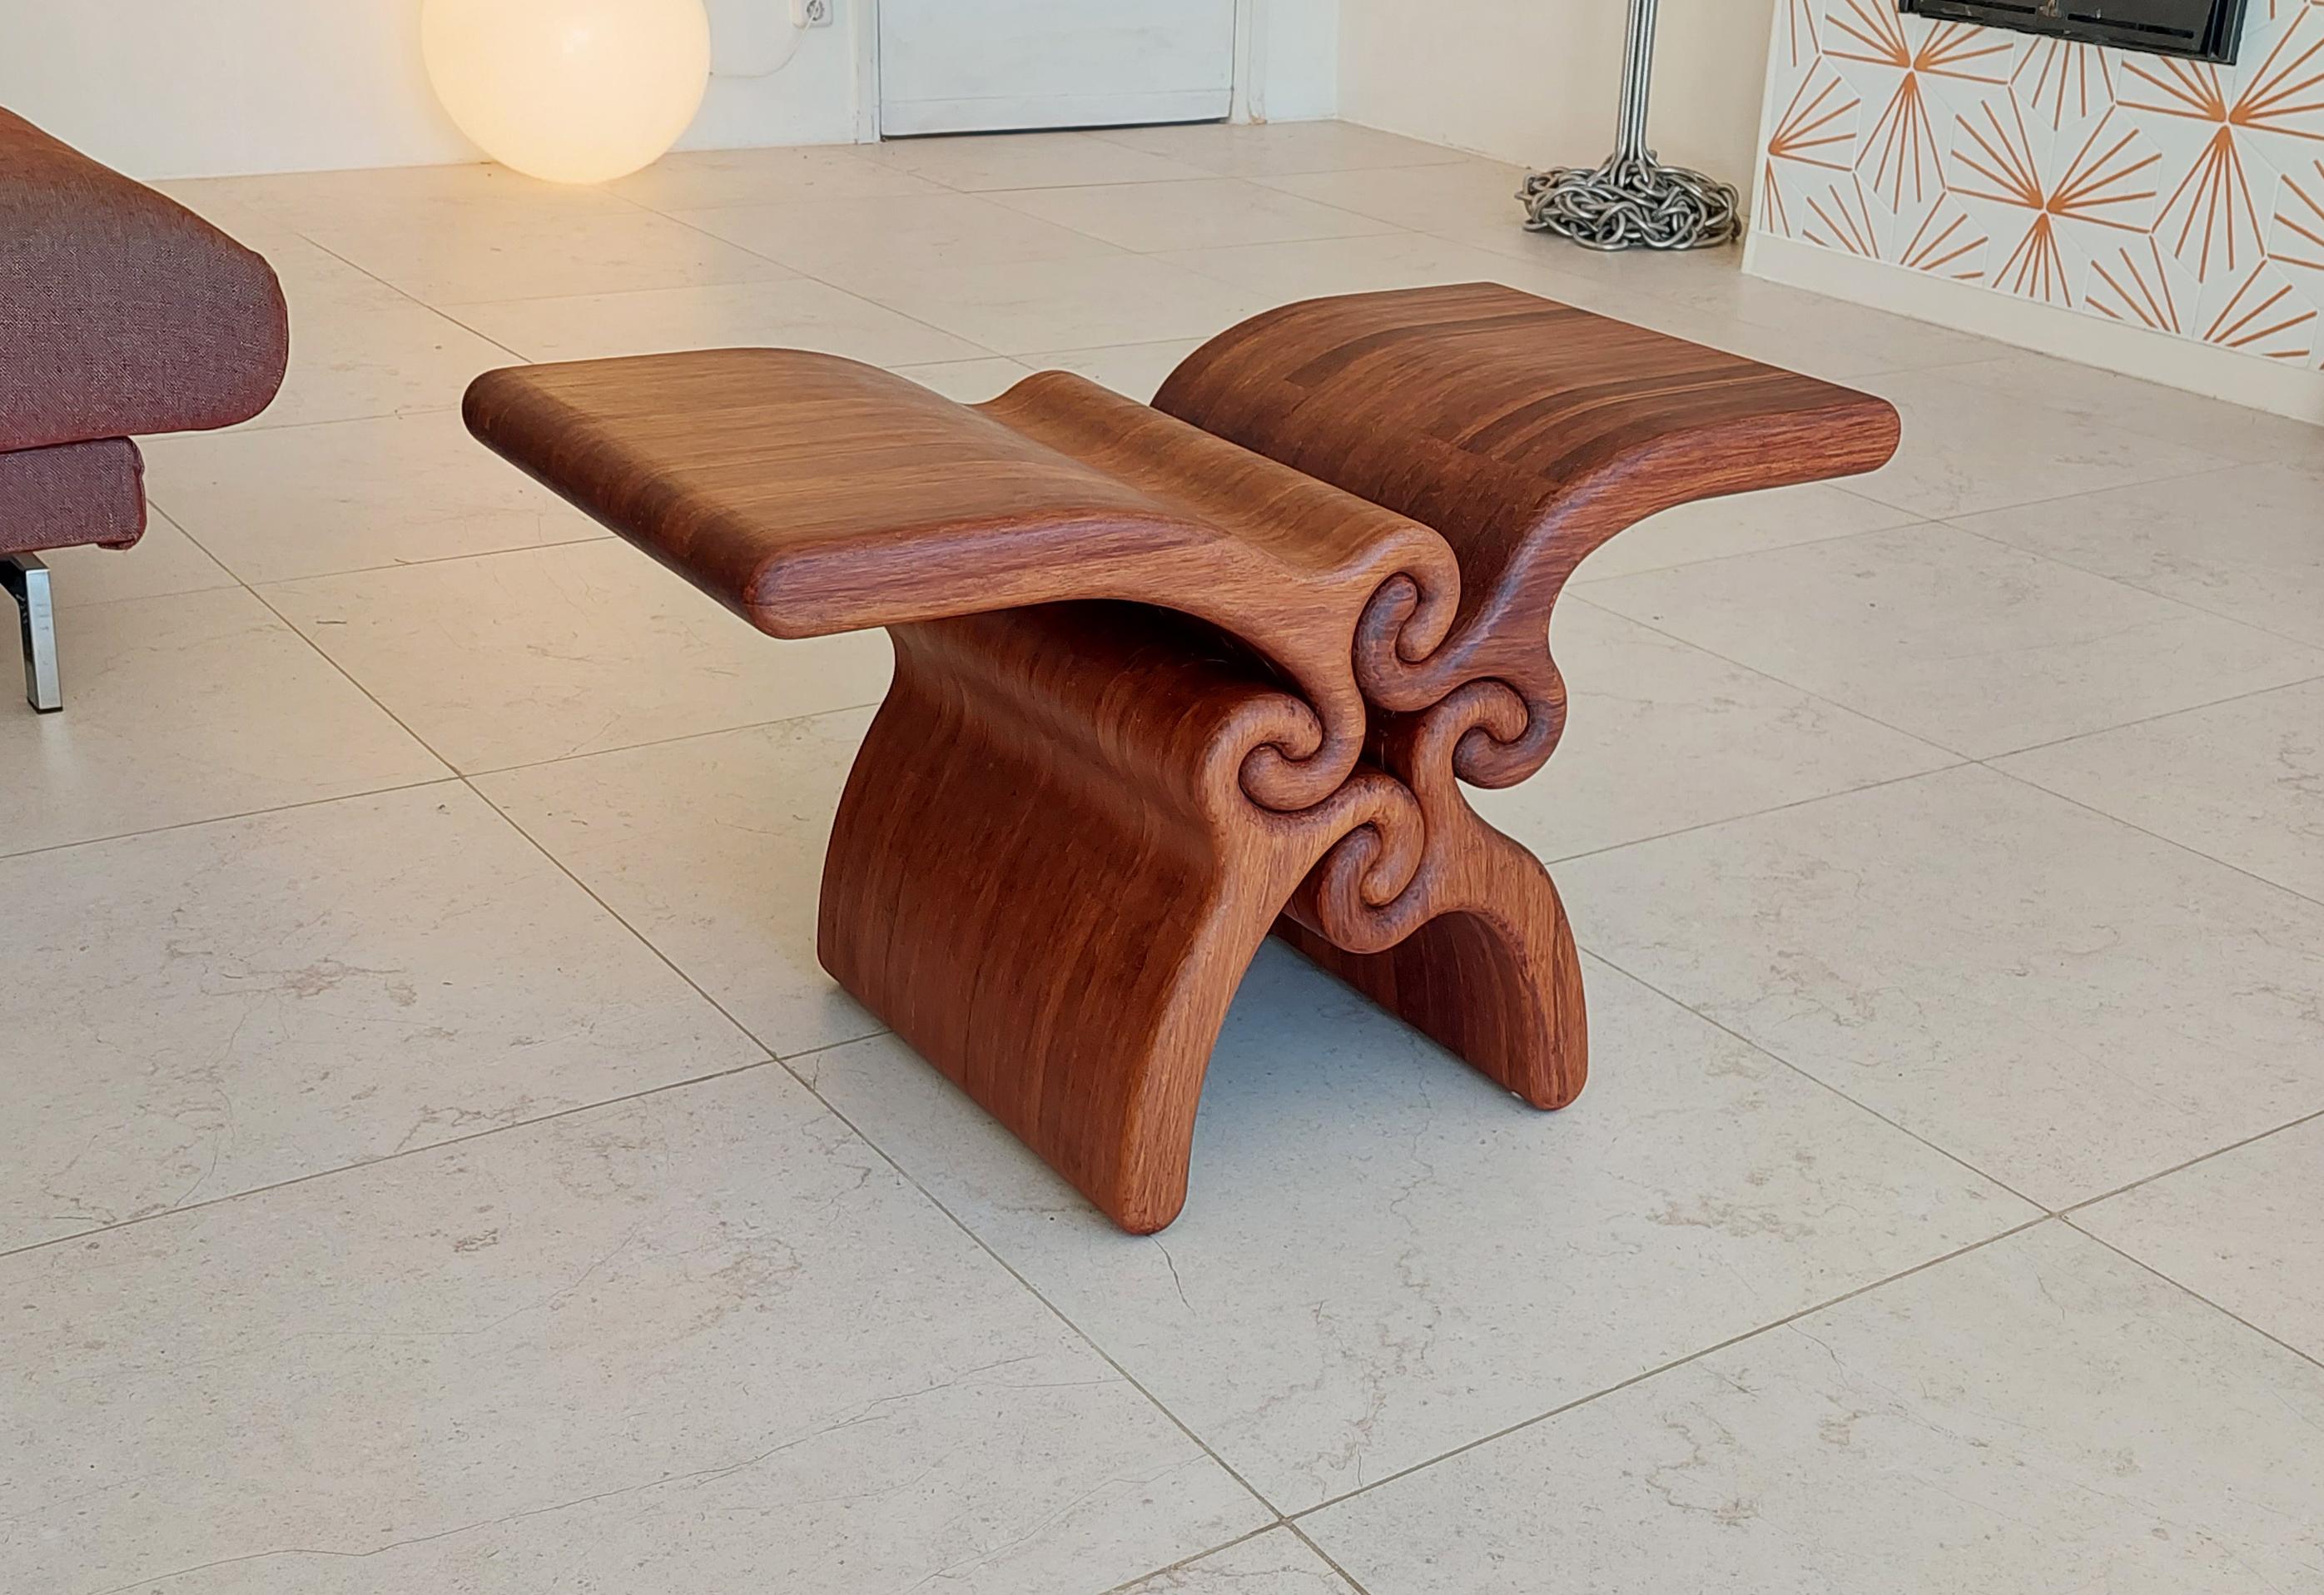 GRIP coffee
Sculptural, brutalistic, monolithic Coffee table /side table/ object
design: JAN PAUL

Four shapes flow to the center to swirl, weave, and grip each other. Firmly holding on to form “GRIP” 
A sculptural, powerful , iconic object